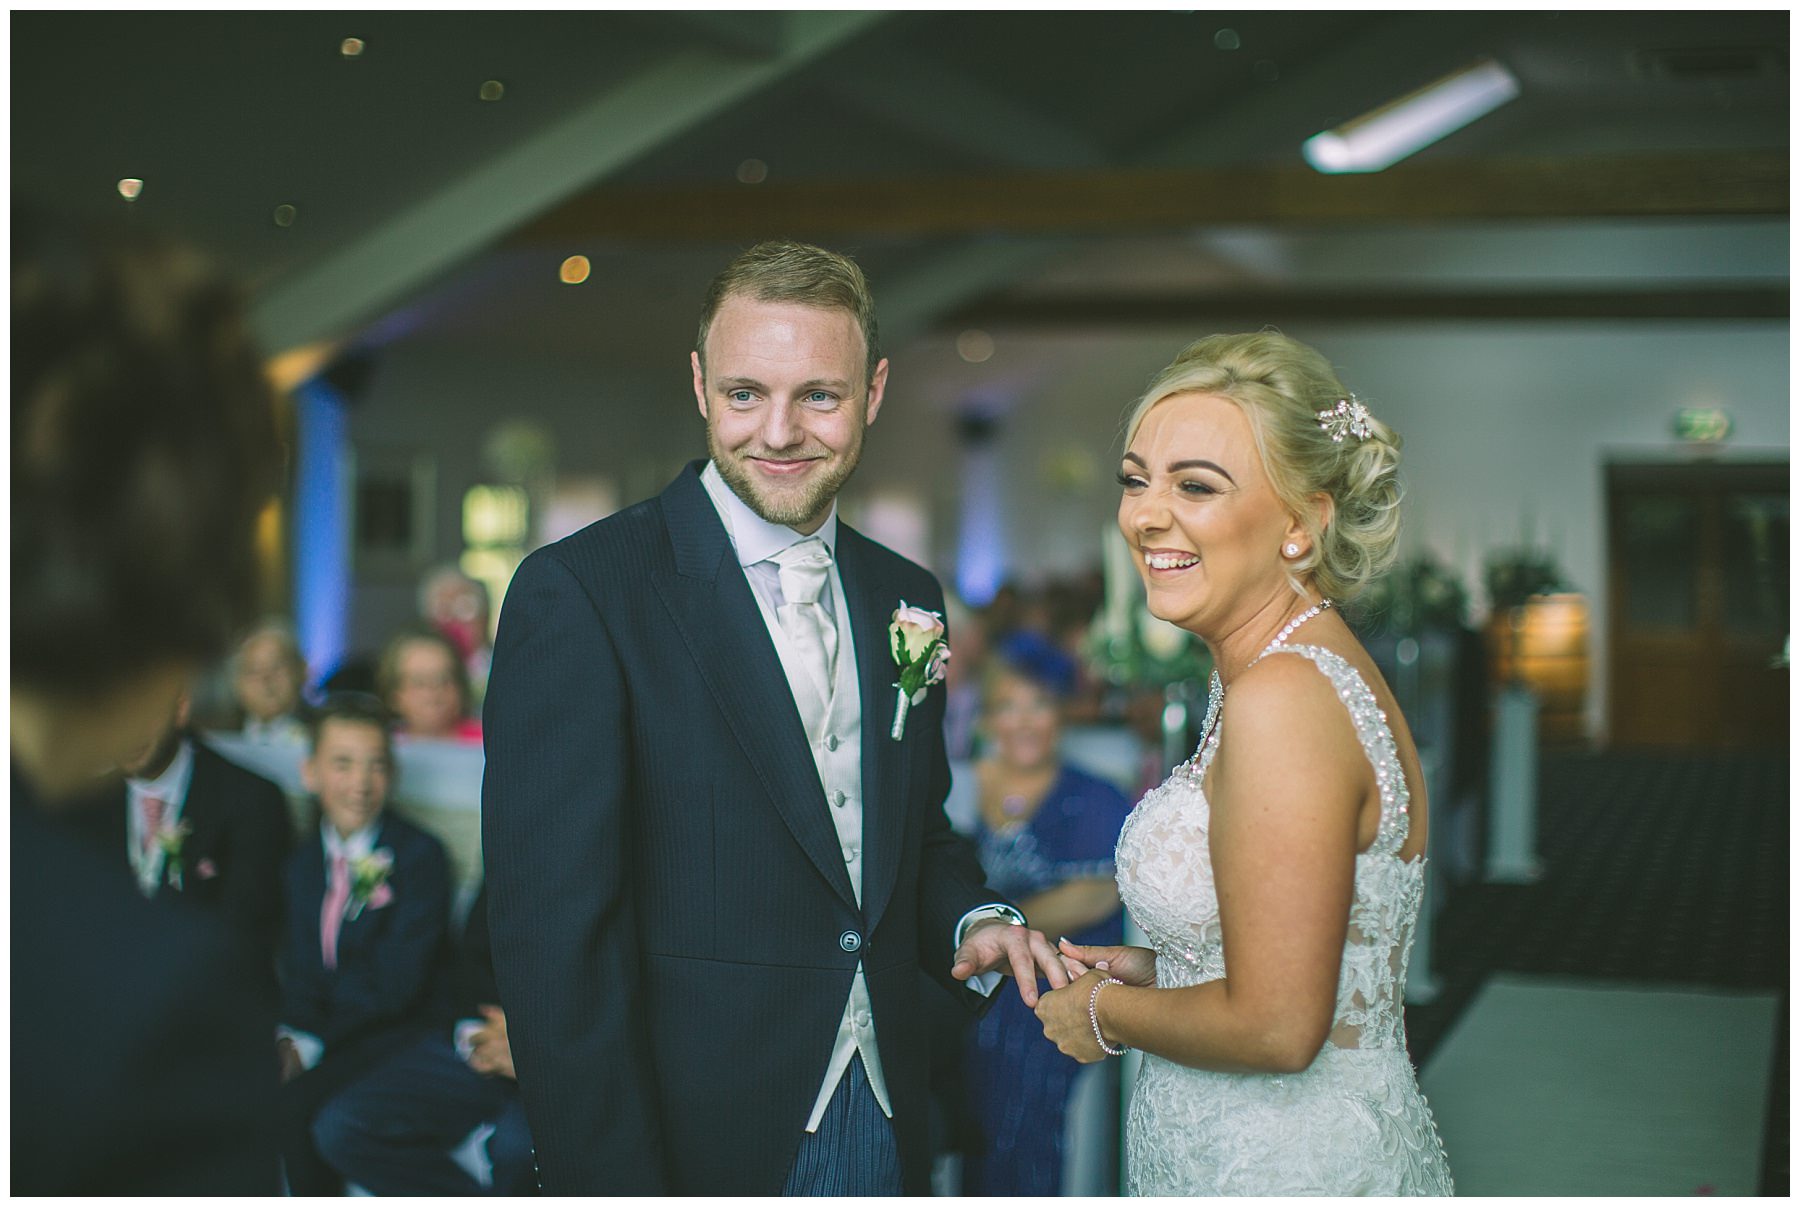 Bride and Groom smile during wedding ceremony in Ramsbottom